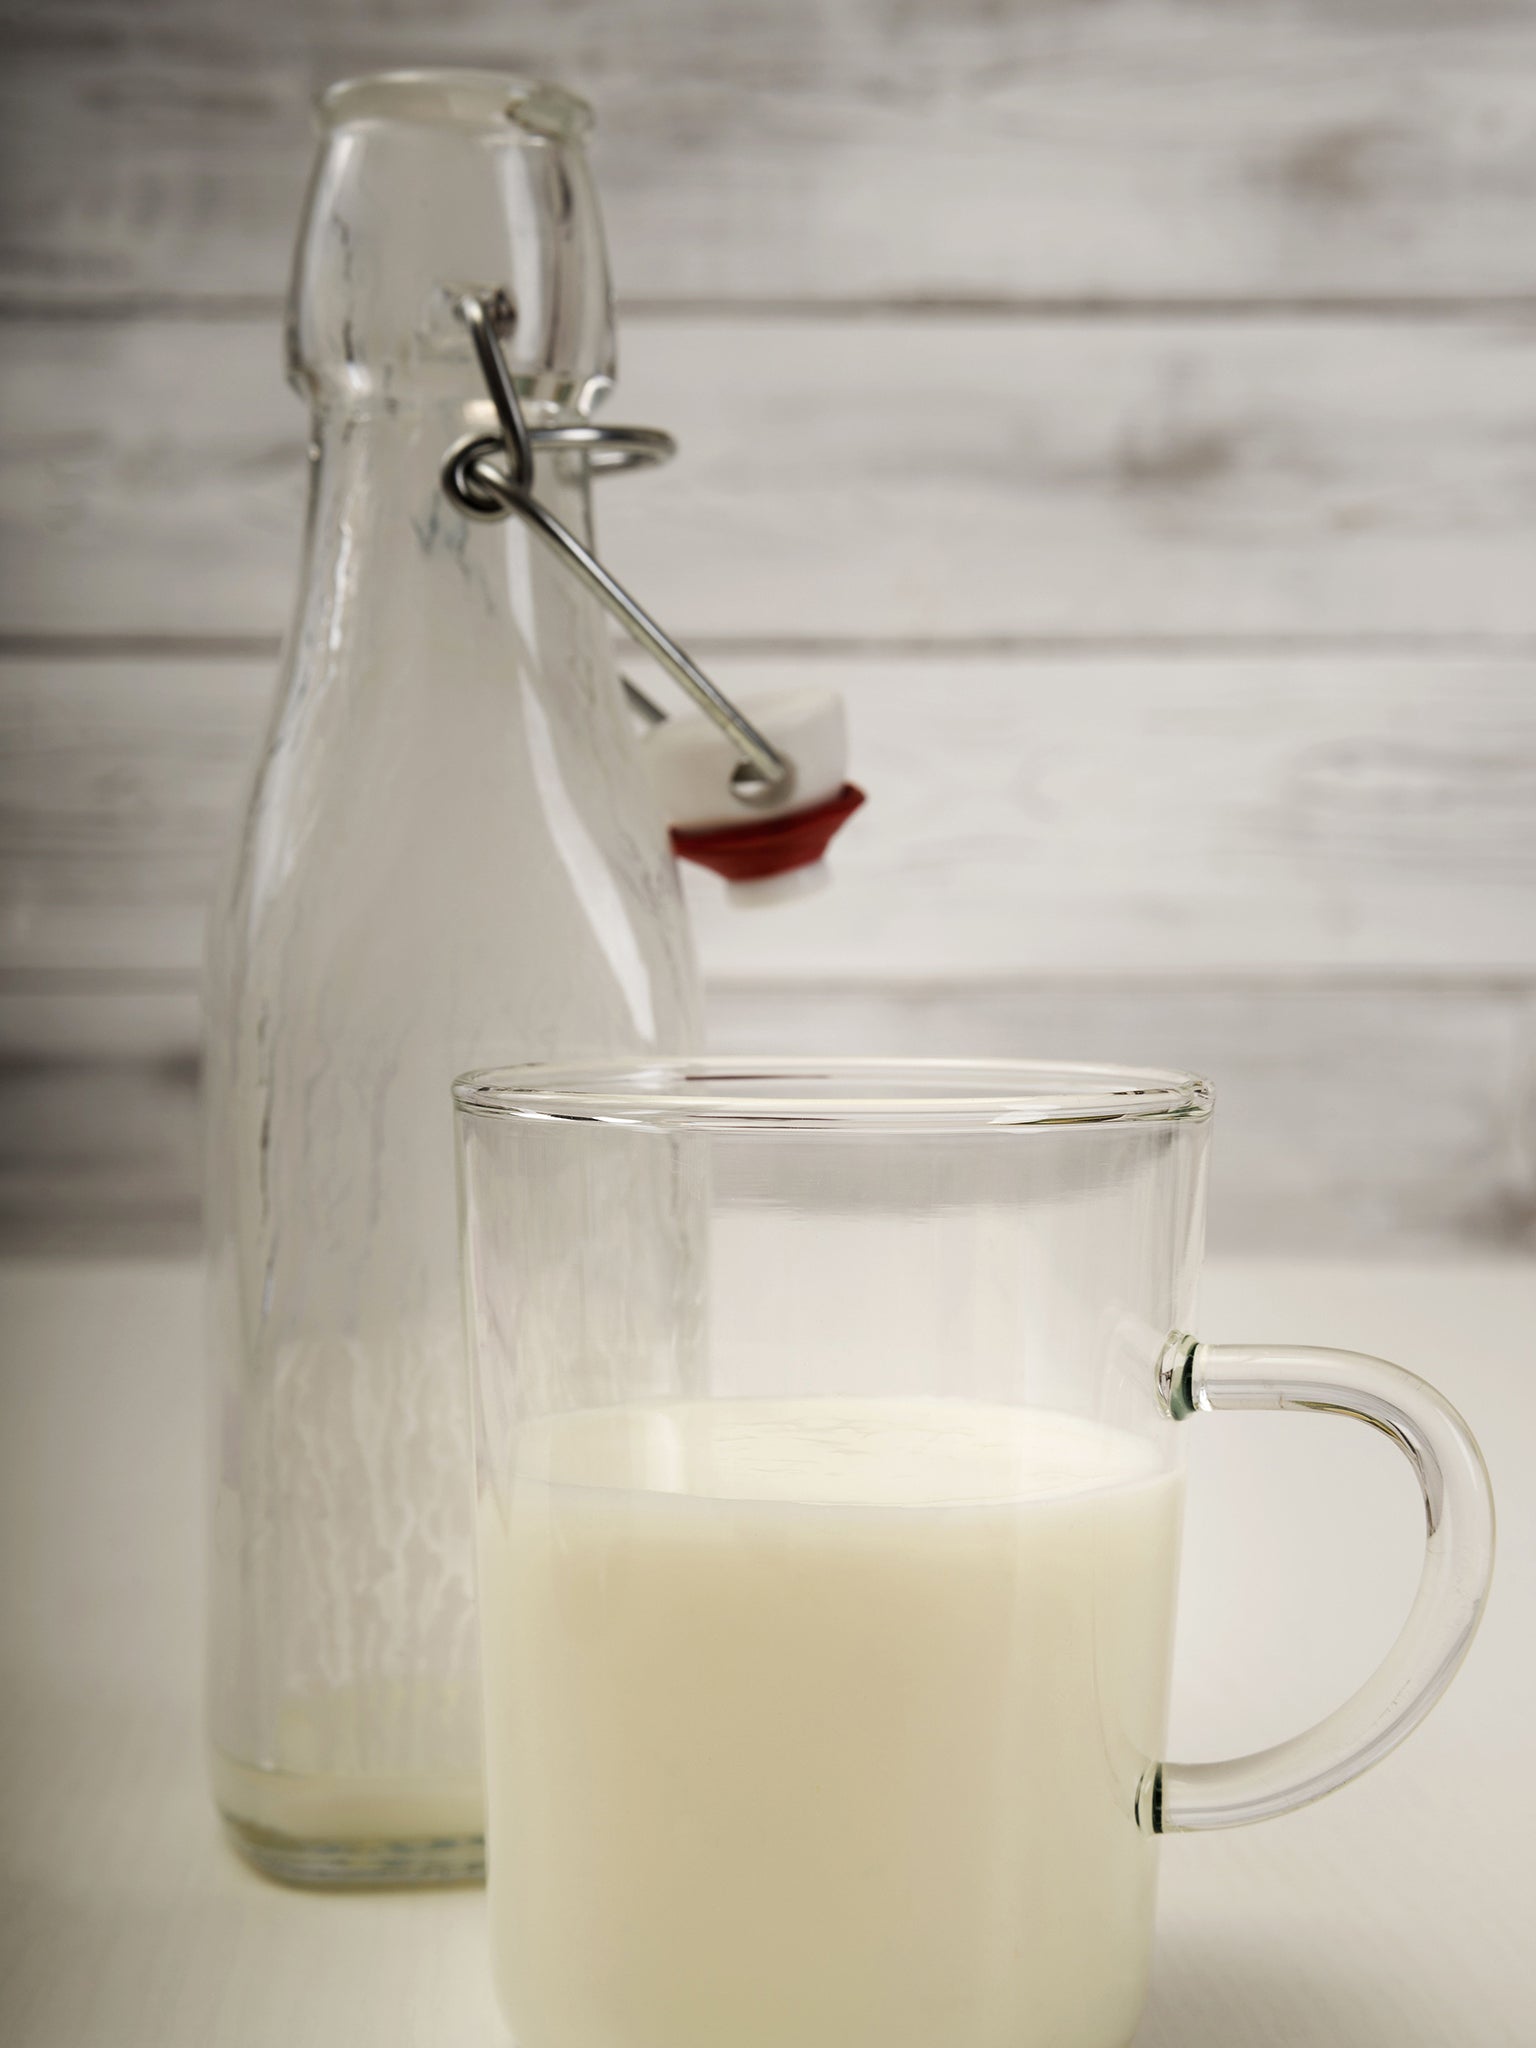 Milk of the mods: buttermilk is fast becoming a kitchen staple